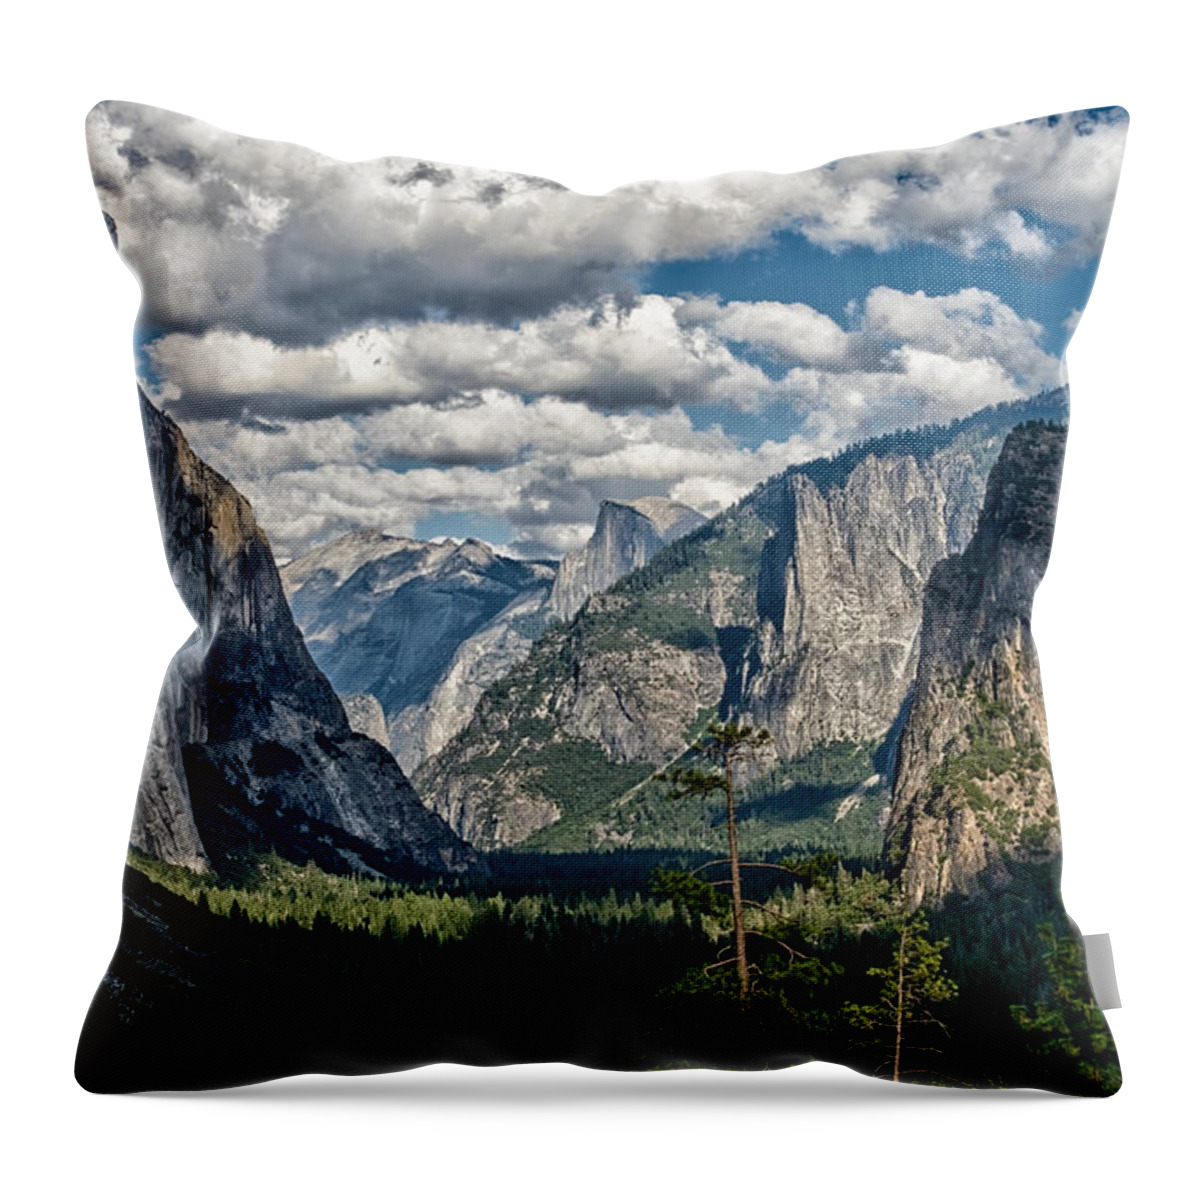 Water River Waterfall Mountains Yosemite National Park Sierra Nevada Landscape Scenic Nature California Sky Clouds Trees Throw Pillow featuring the photograph A Magical Place by Cat Connor